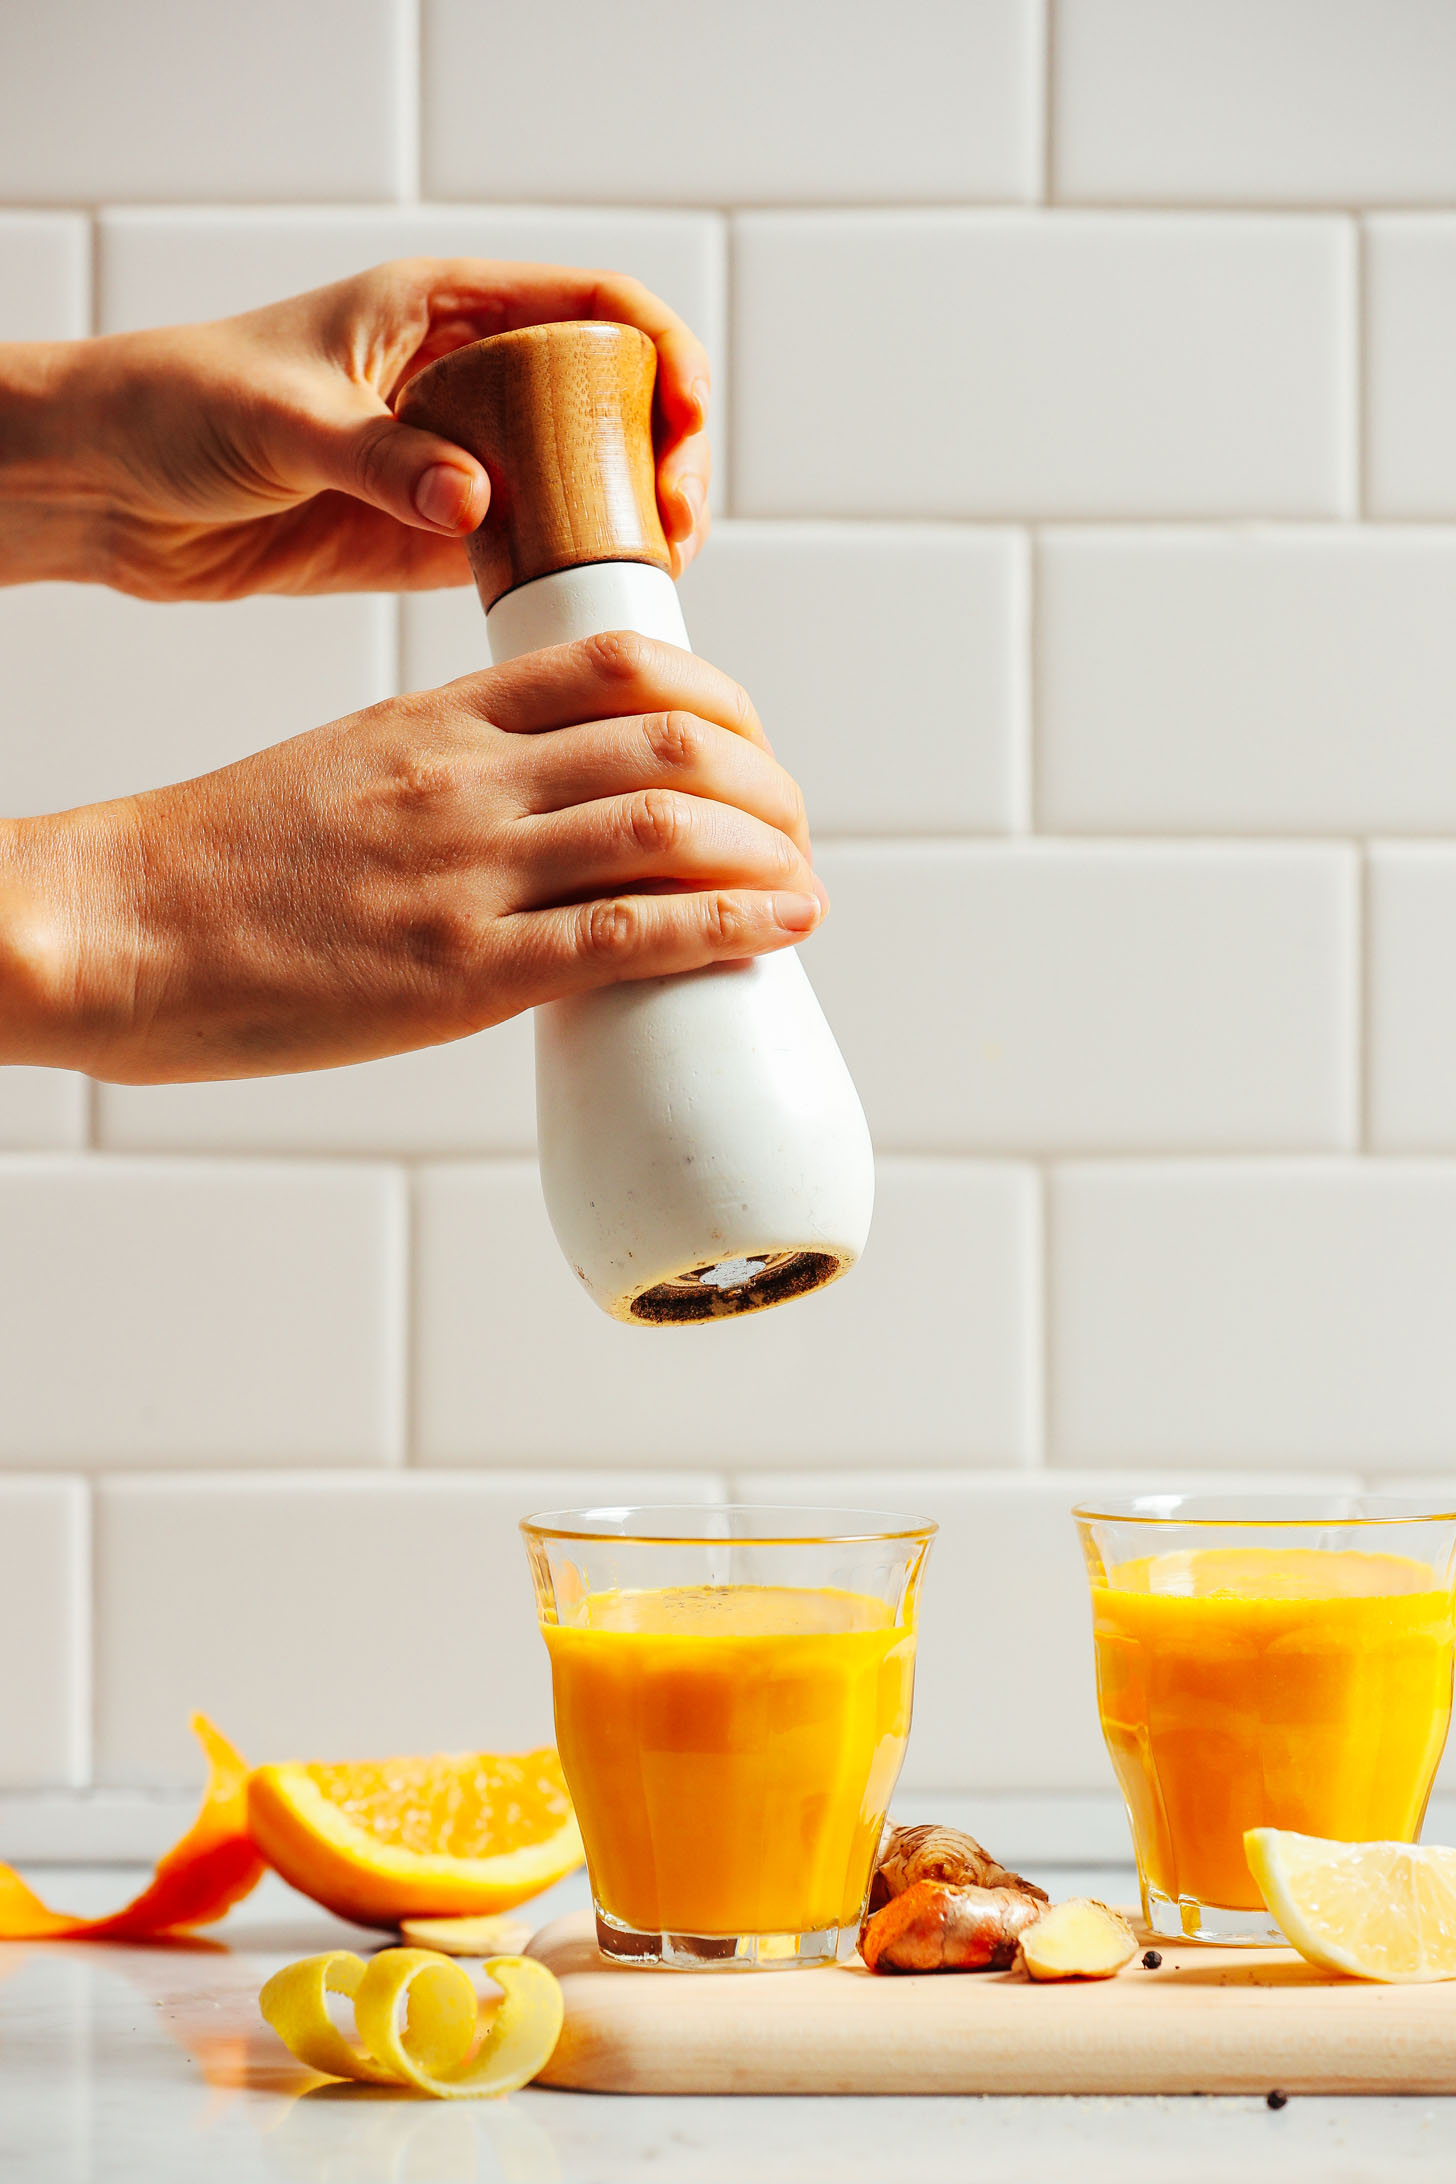 Adding black pepper to our Turmeric Wellness Shots to boost its healing properties